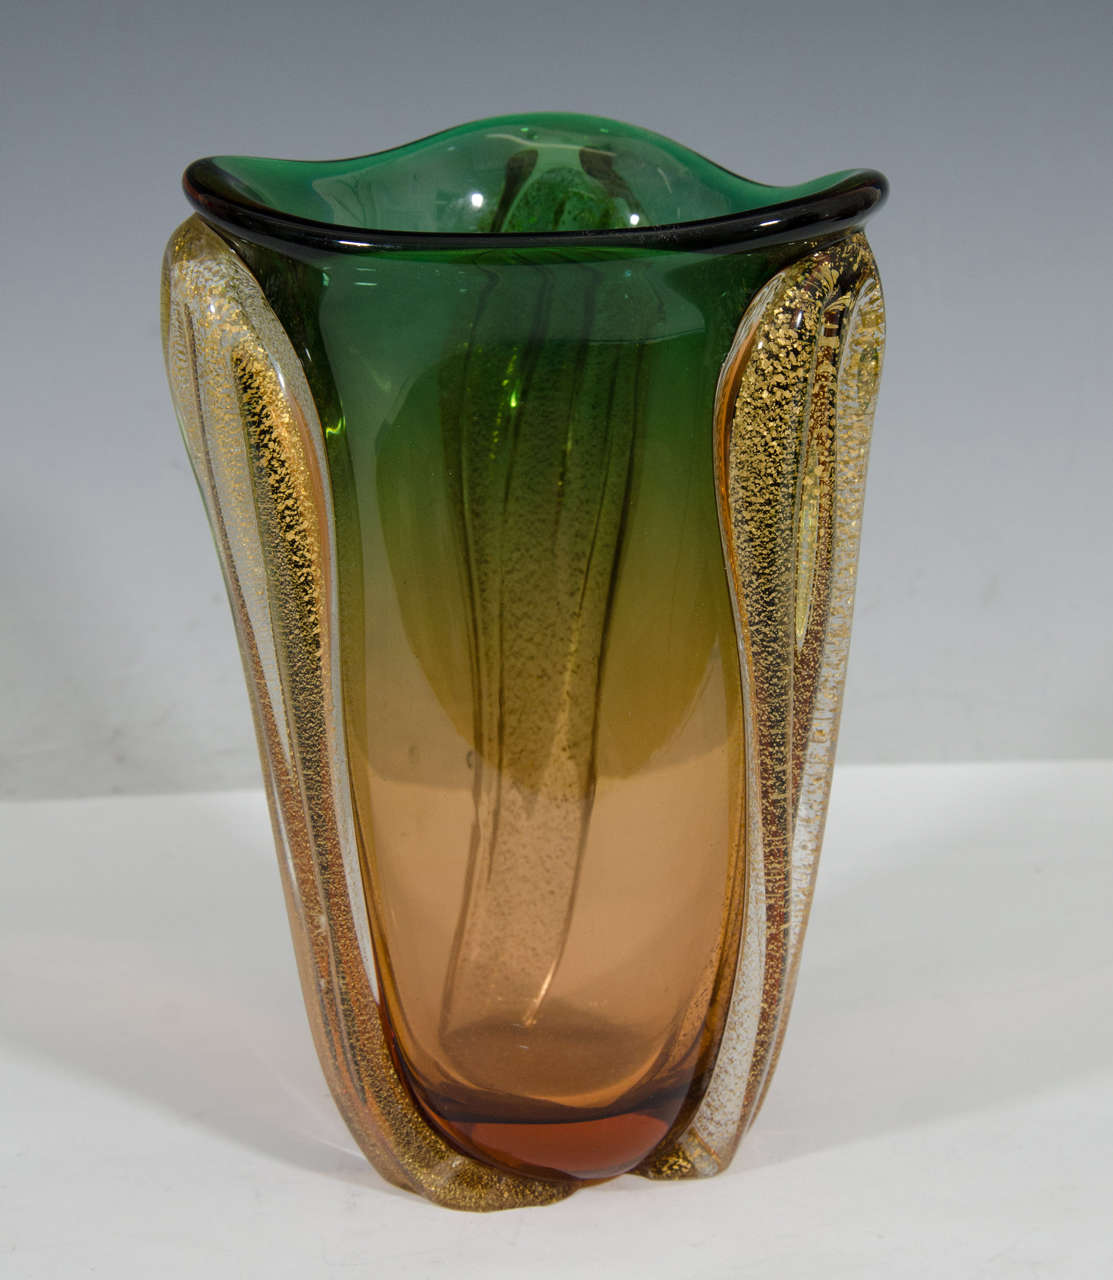 A vintage Murano glass pointed vase, produced in Italy circa 1950's - 1960's, in ombre green and amber, infused with flecks of gold leaf. Very good vintage condition, consistent with age and use, small chip on the base.